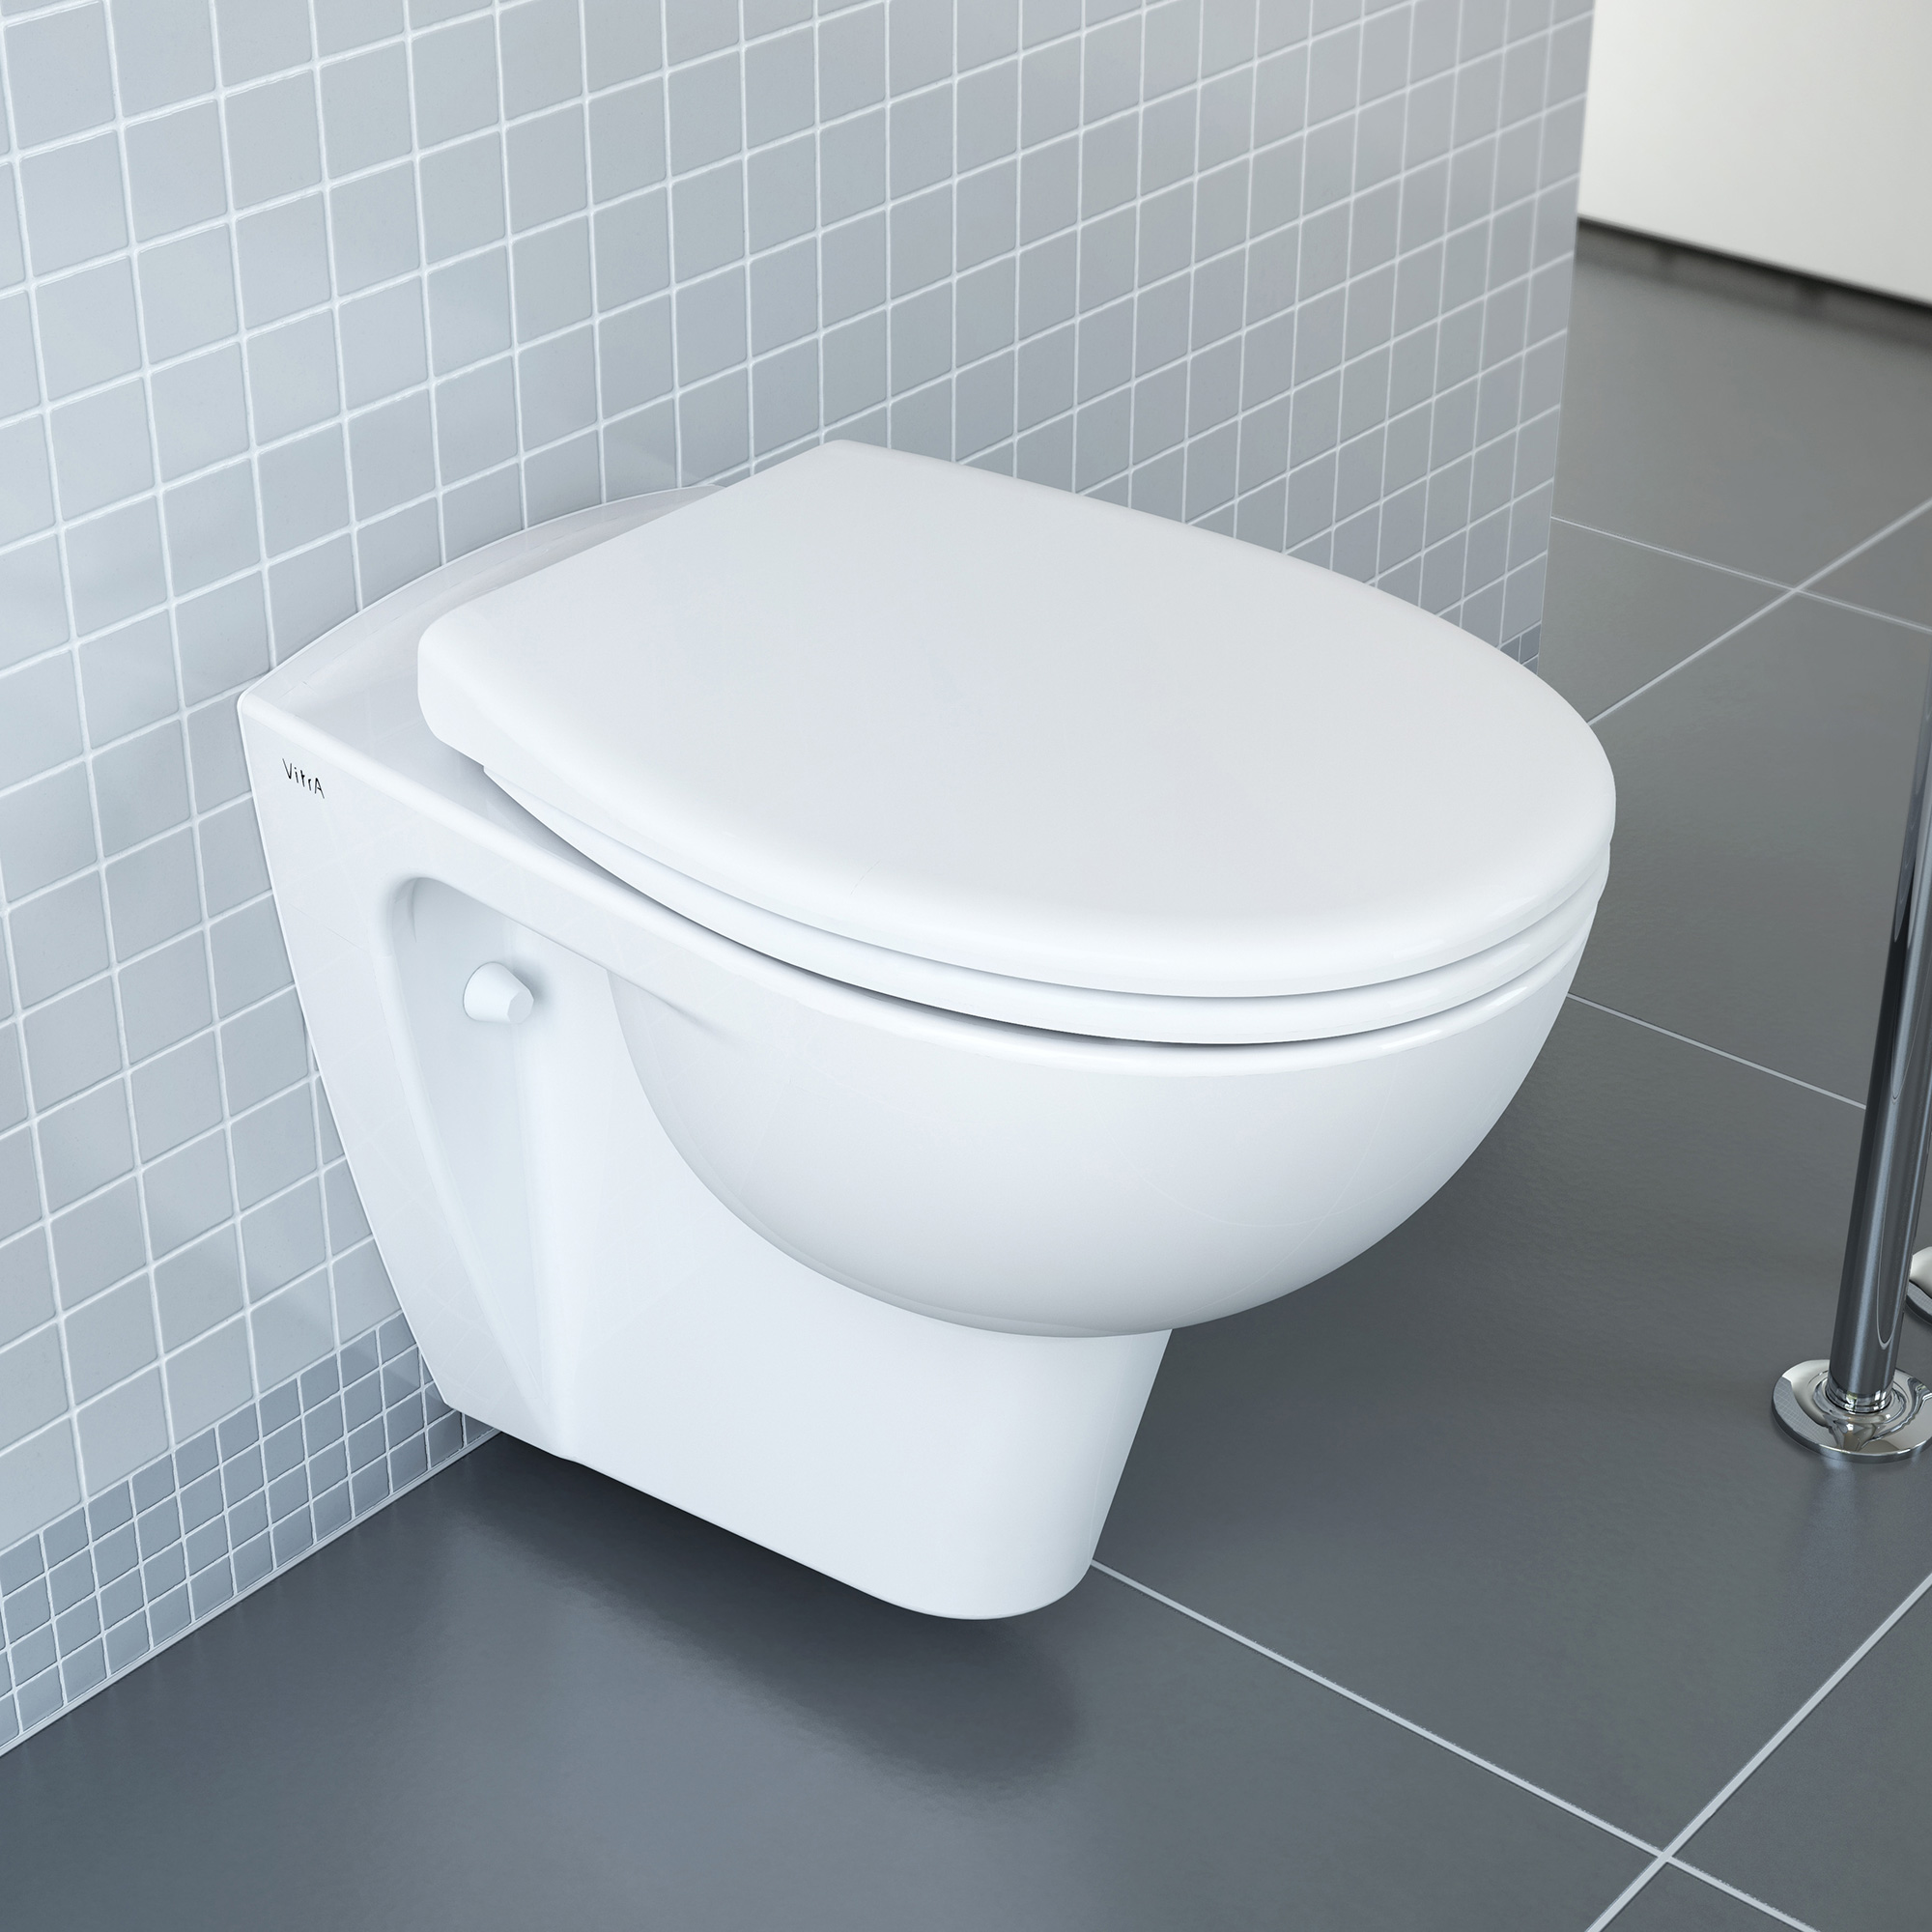 Vitra Conforma Wall Mounted Washdown Toilet White With Vitraclean 5812b403 0075 Reuter